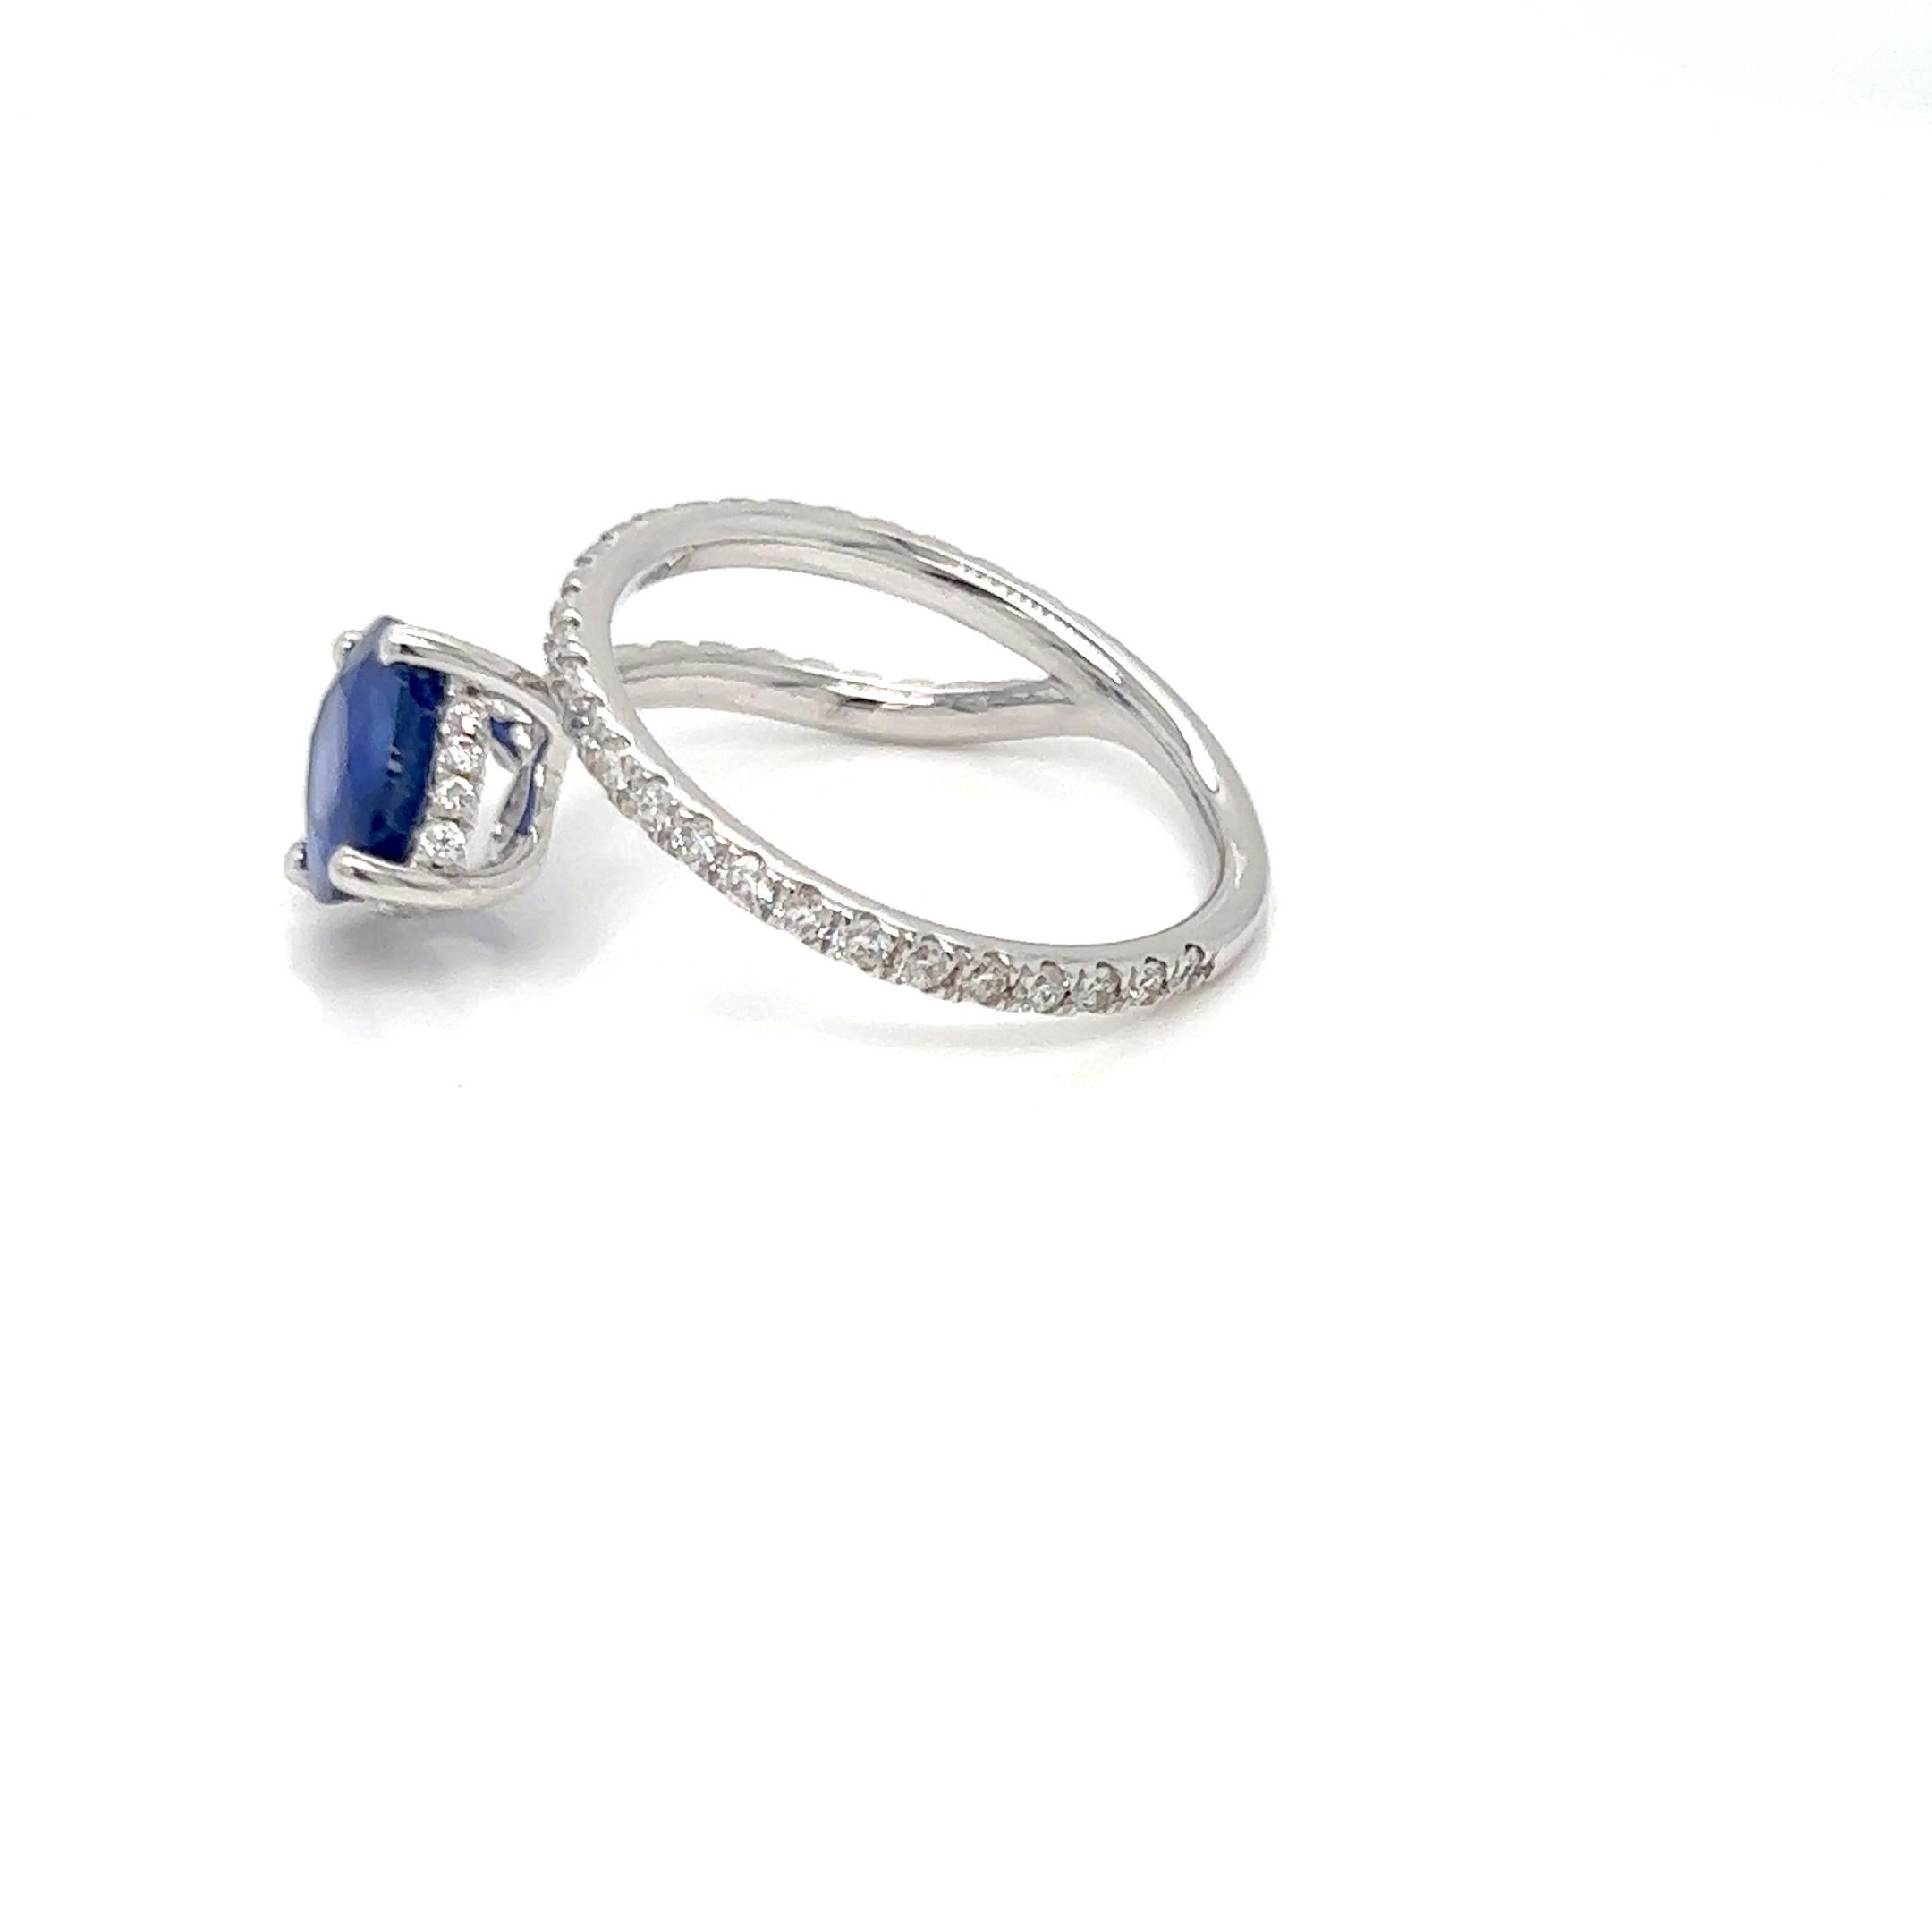 This special ring is meant for someone special in your life. This ring contains a oval sapphire as a center stone with diamonds all around making it a wrap ring with the diamonds on the band giving it a sophisticated look. The sapphire is sourced